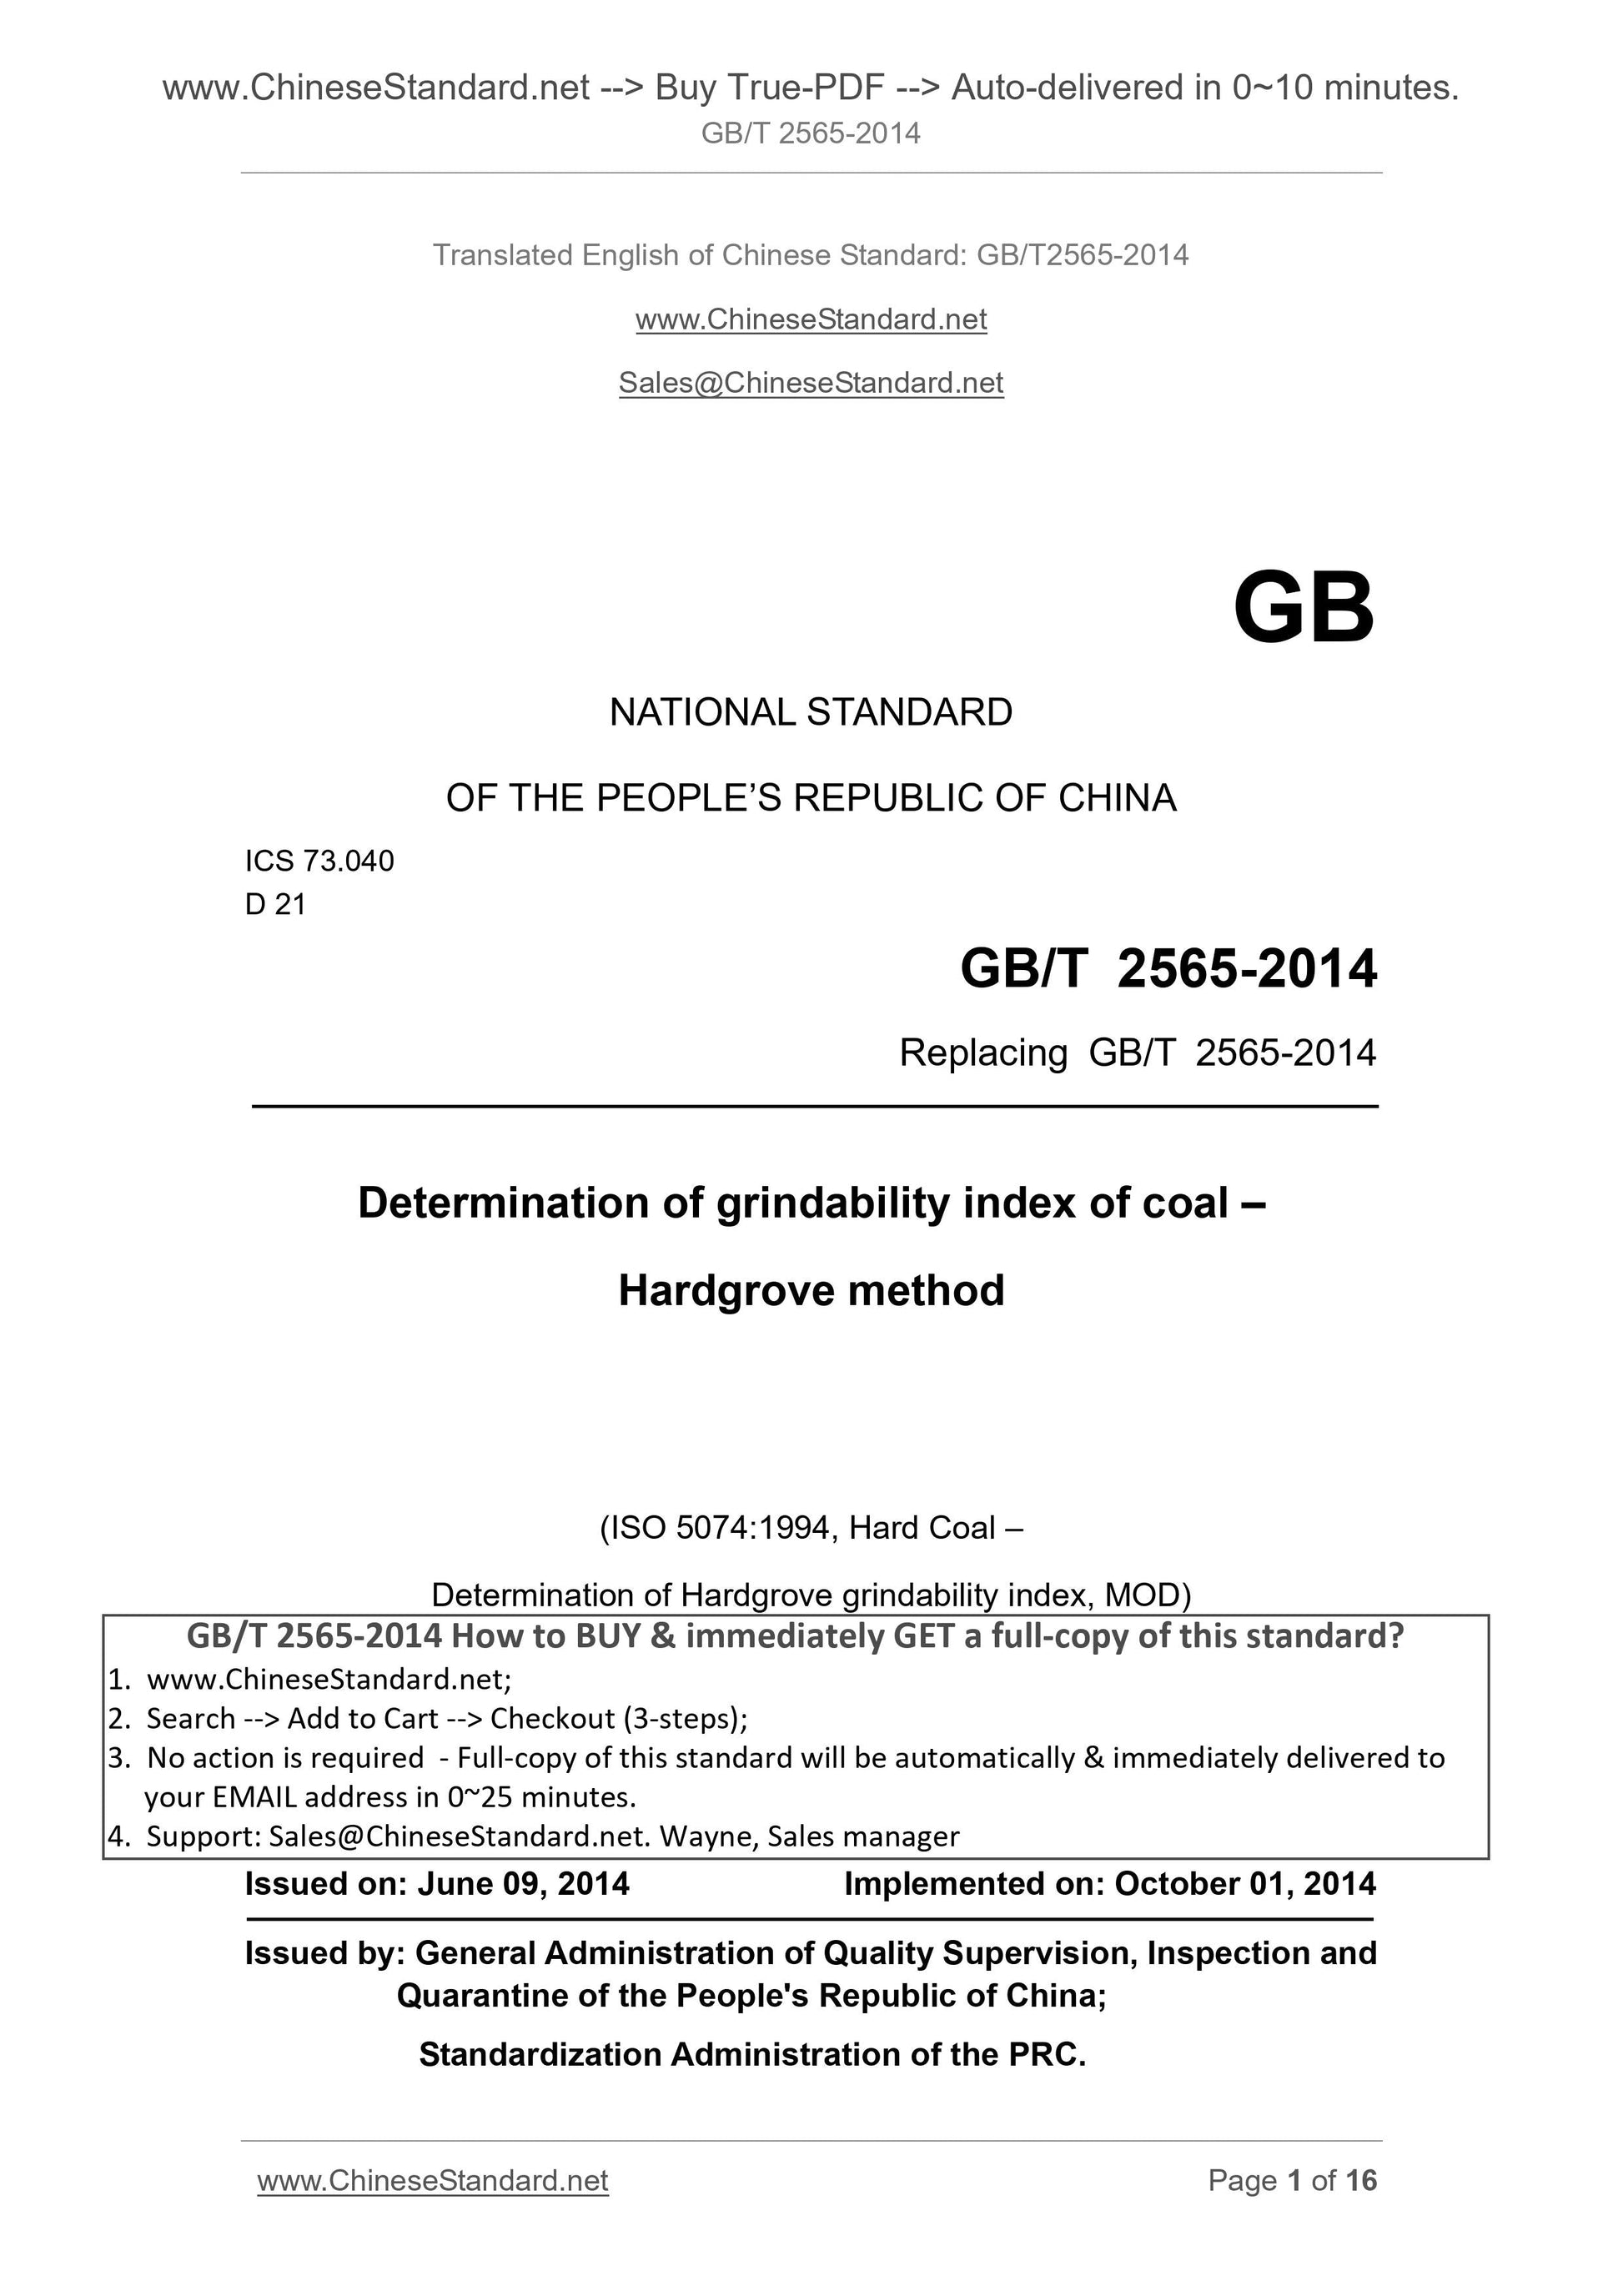 GB/T 2565-2014 Page 1